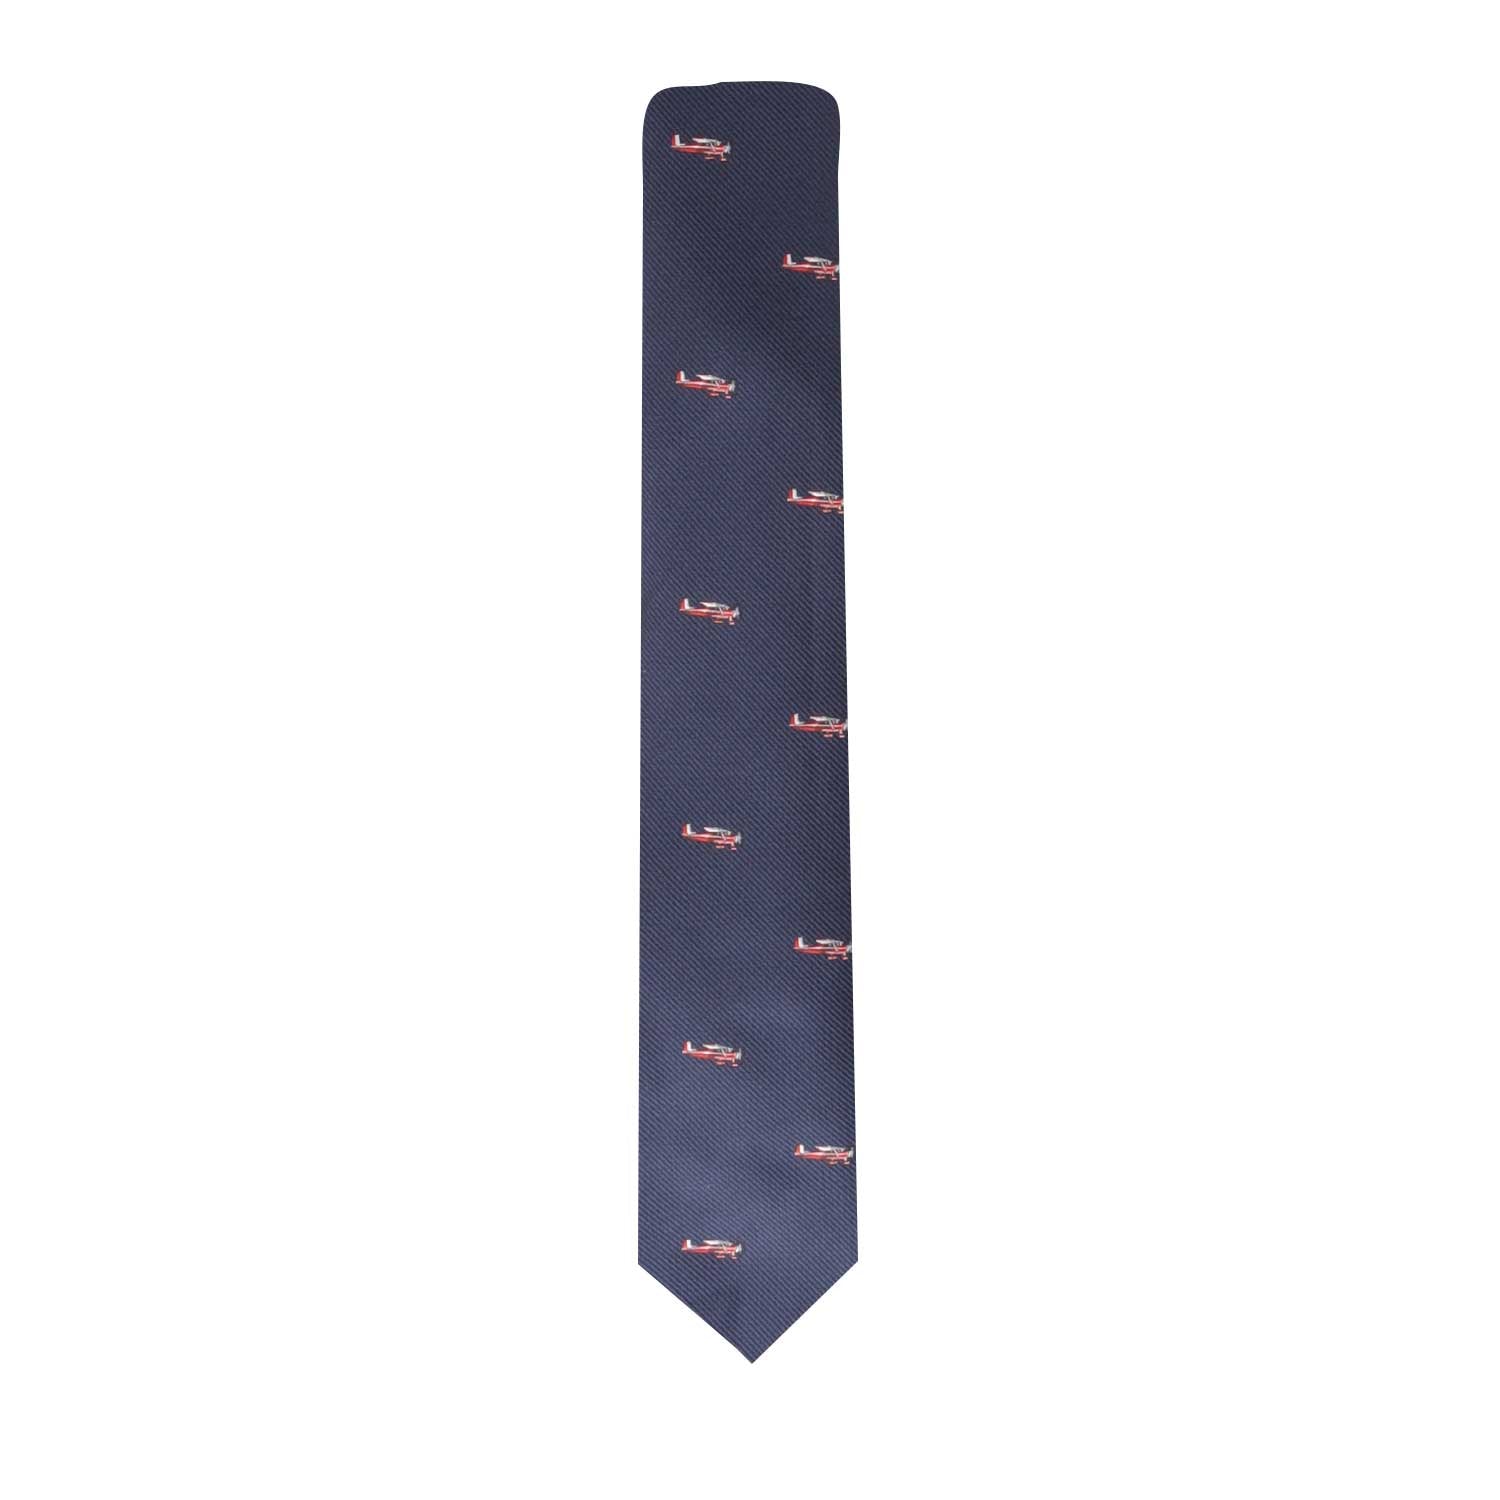 A Classic Aircraft blue tie with a red logo on it.